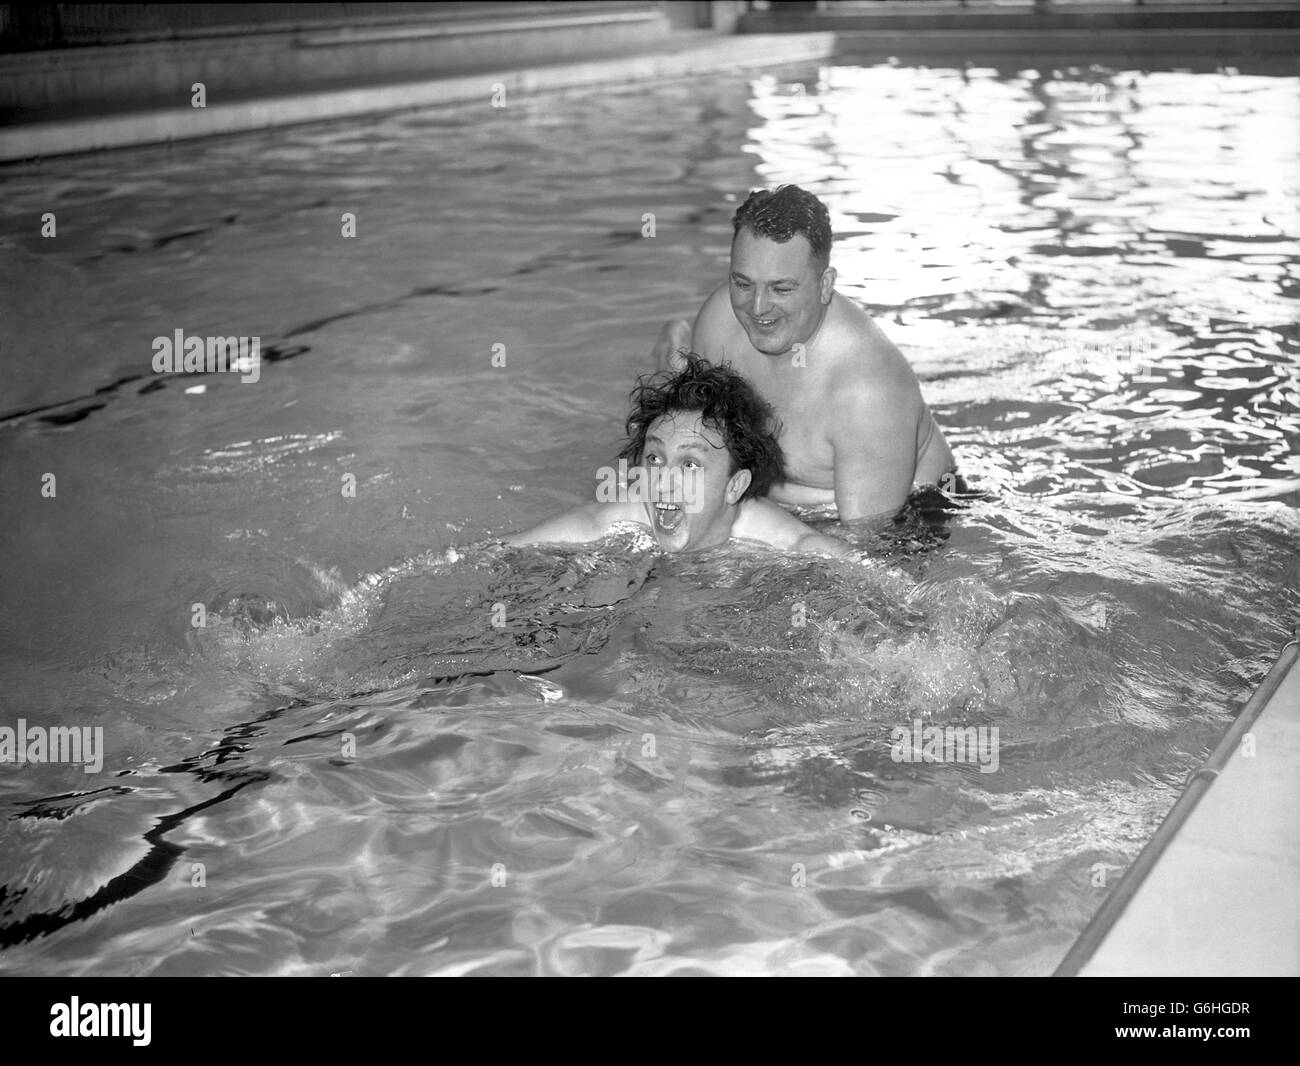 Entertainment - Ken Dodd Swimming Lessons - Coventry Stock Photo